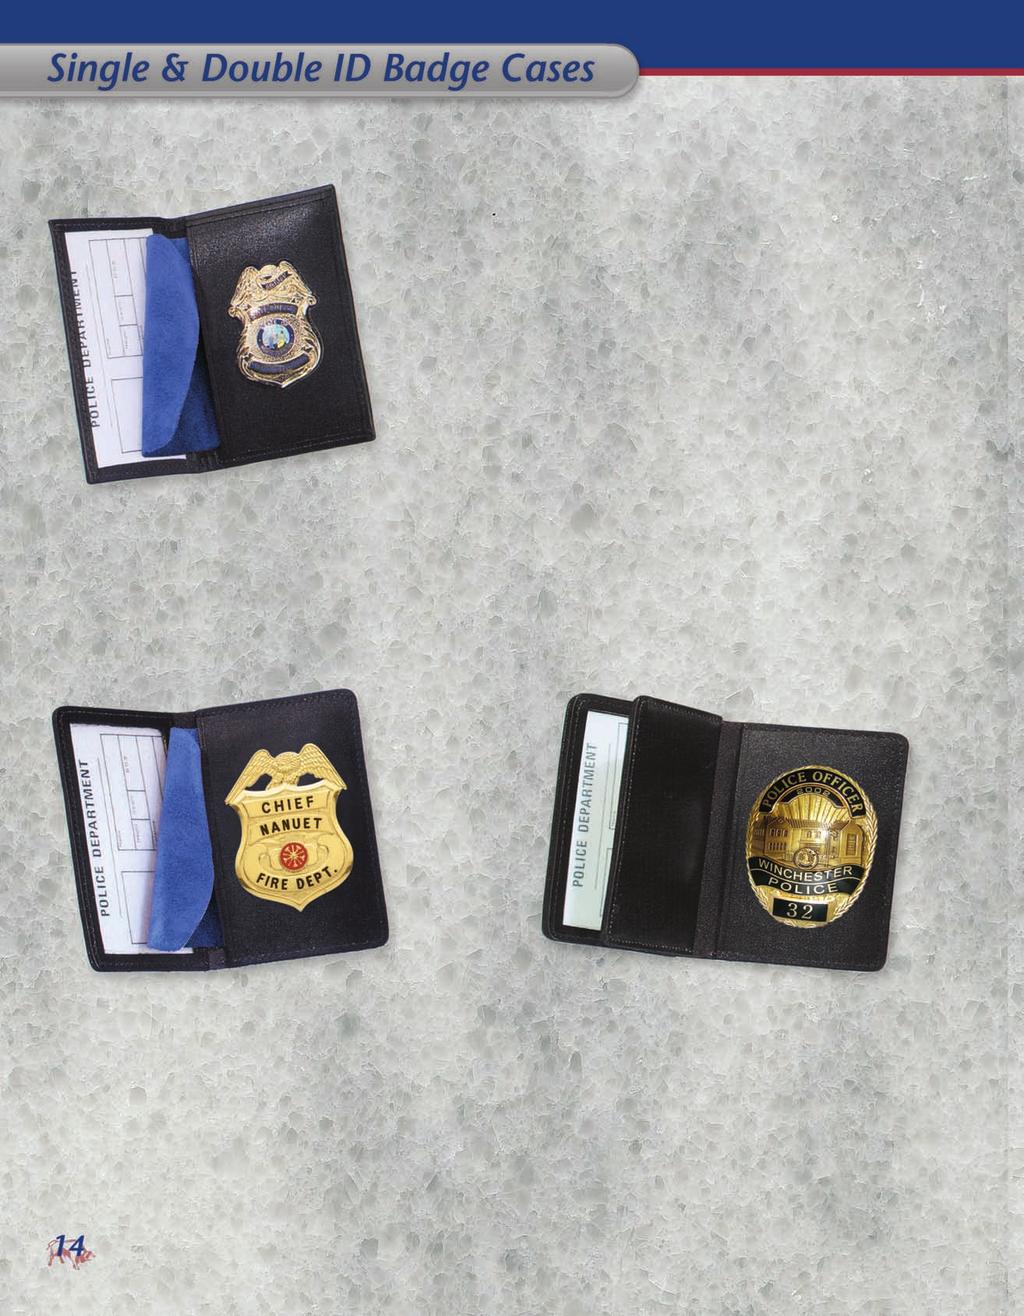 Strong Leather is the leading supplier of badge cases and wallets in the United States, and provides products to many law enforcement agencies (through out) the world.